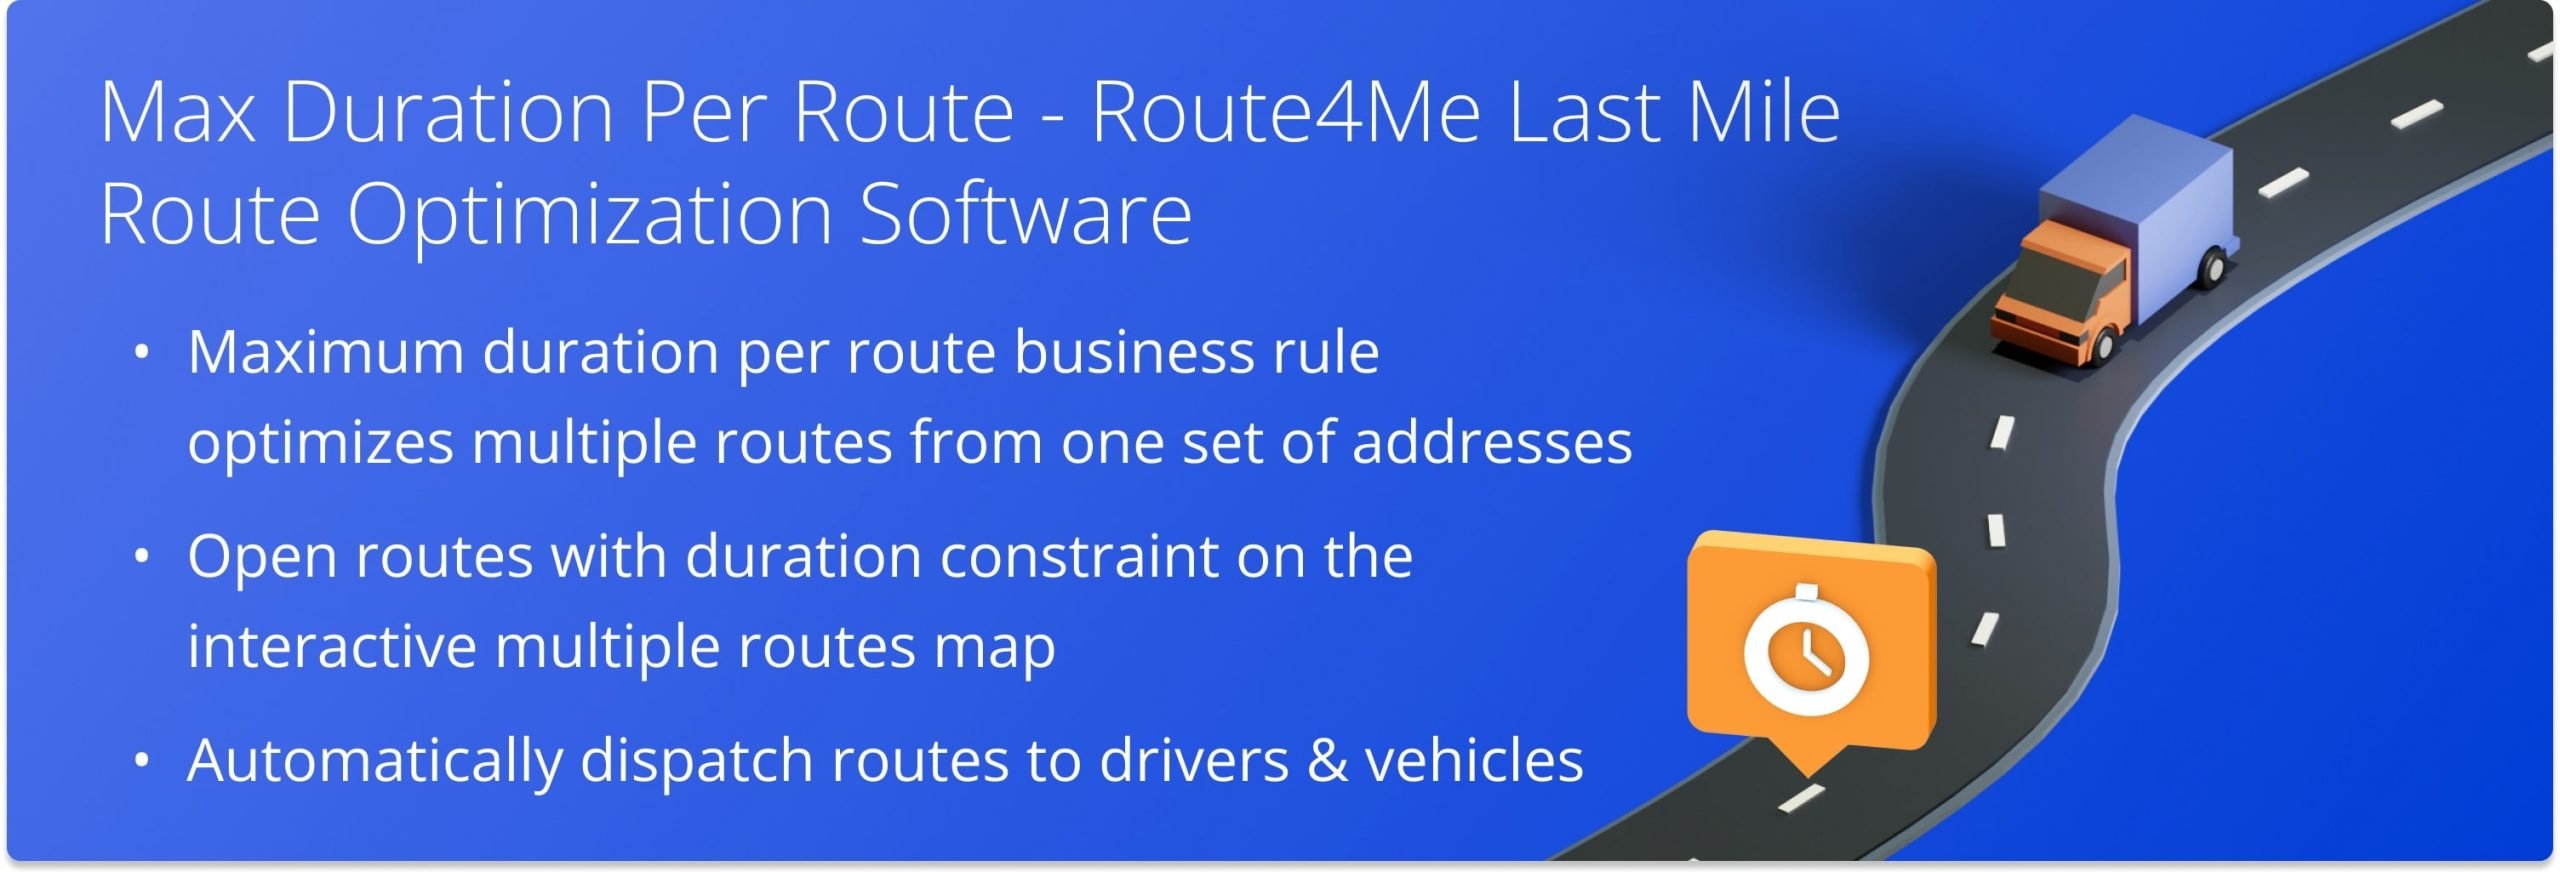 Plan multiple routes with limited max duration from a single set of addresses automatically with Route4Me's Max Duration Business Rule.